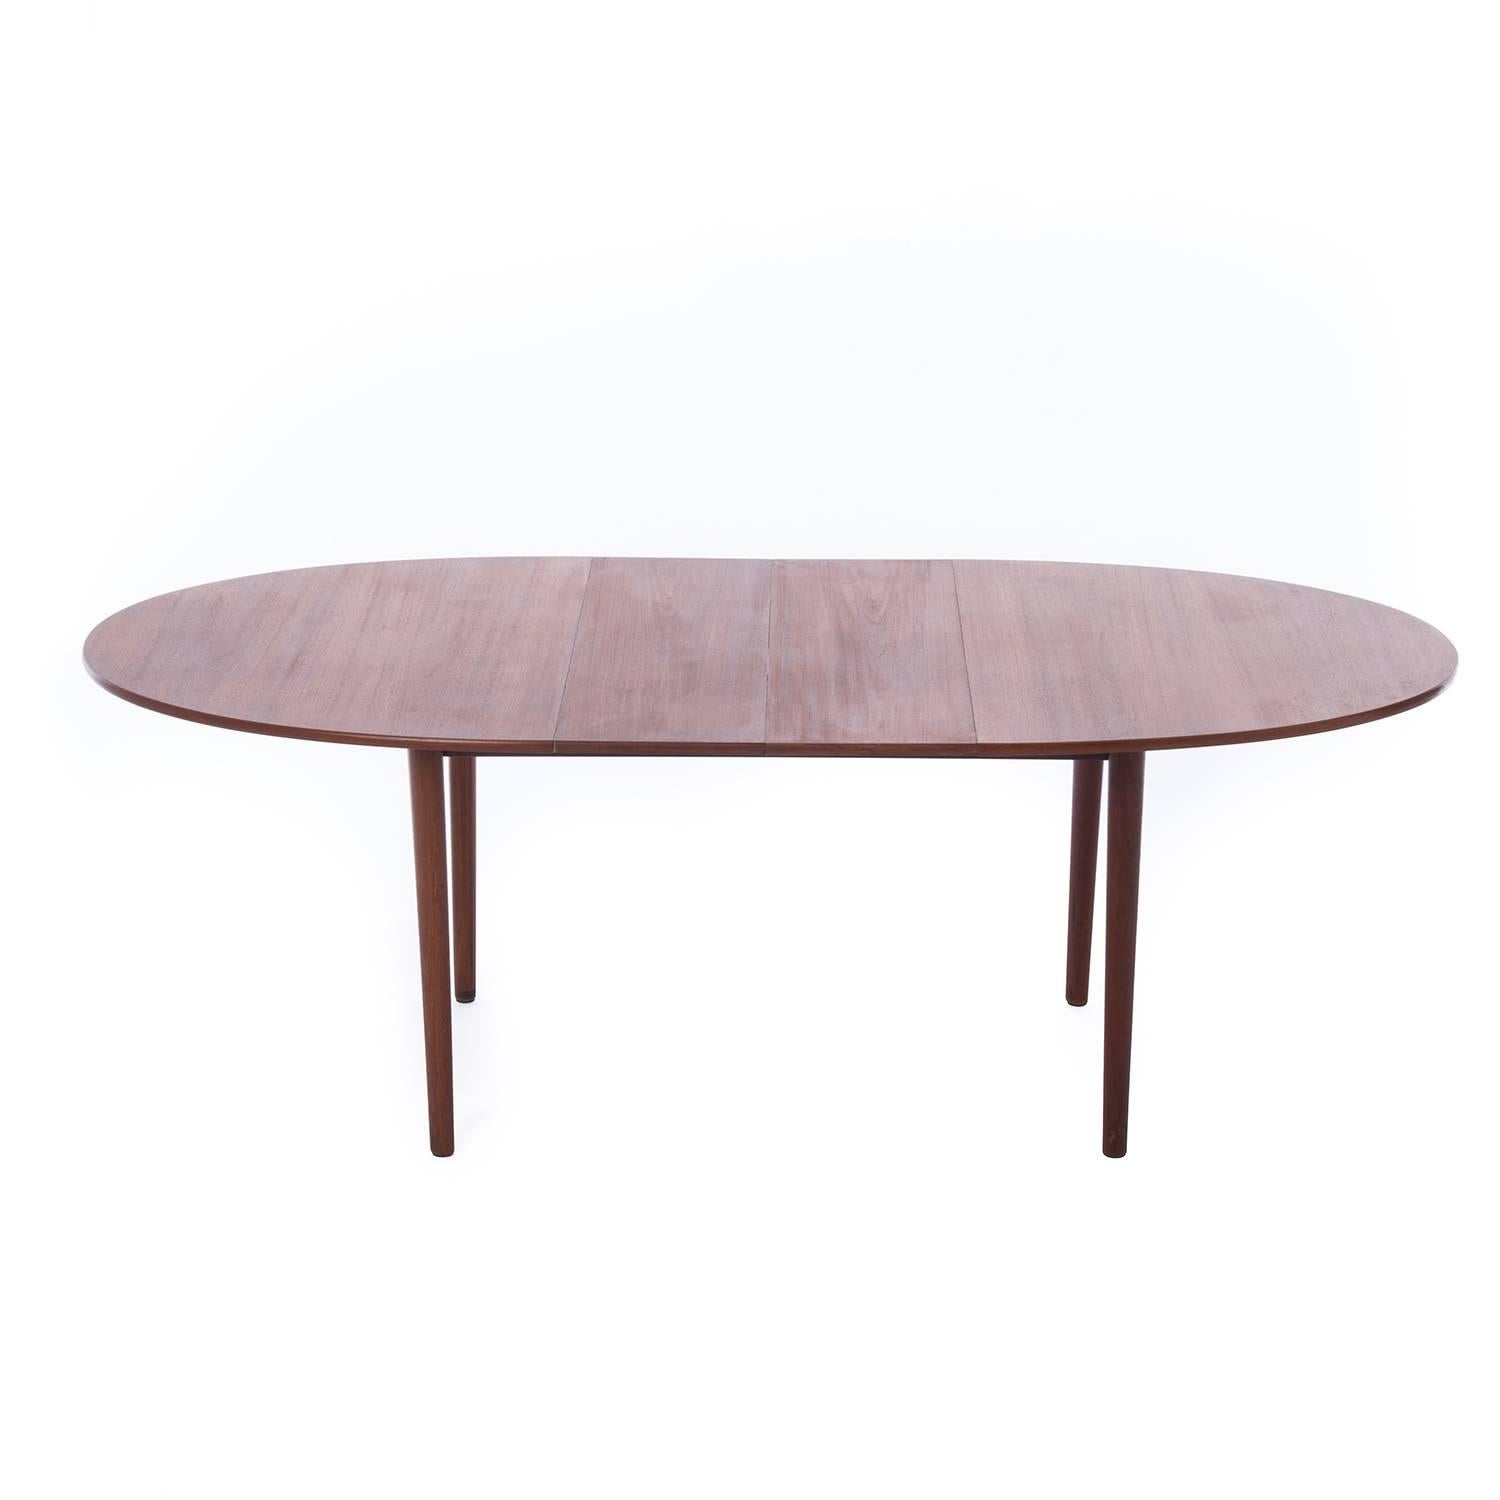 Scandinavian Modern Danish Modern Oval Ellipse Dining Table with Two Leaves